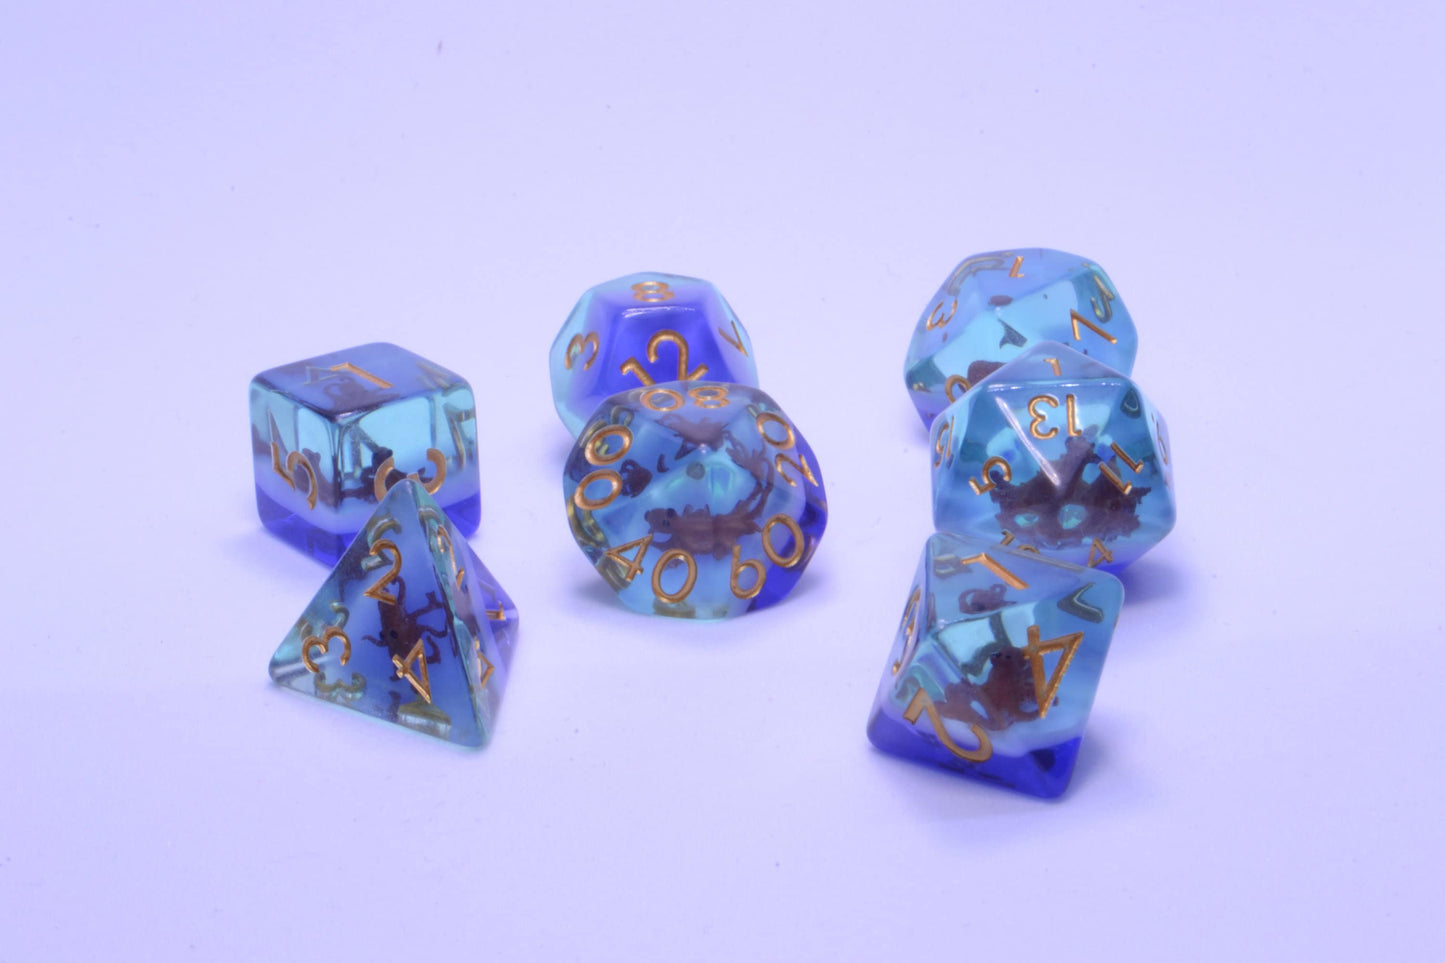 Coffee Kraken - A Friendly Octopus Encased Soft Edge Resin D&D Dice Set With Gold Numbering - For Dungeons and Dragons - Gift Set